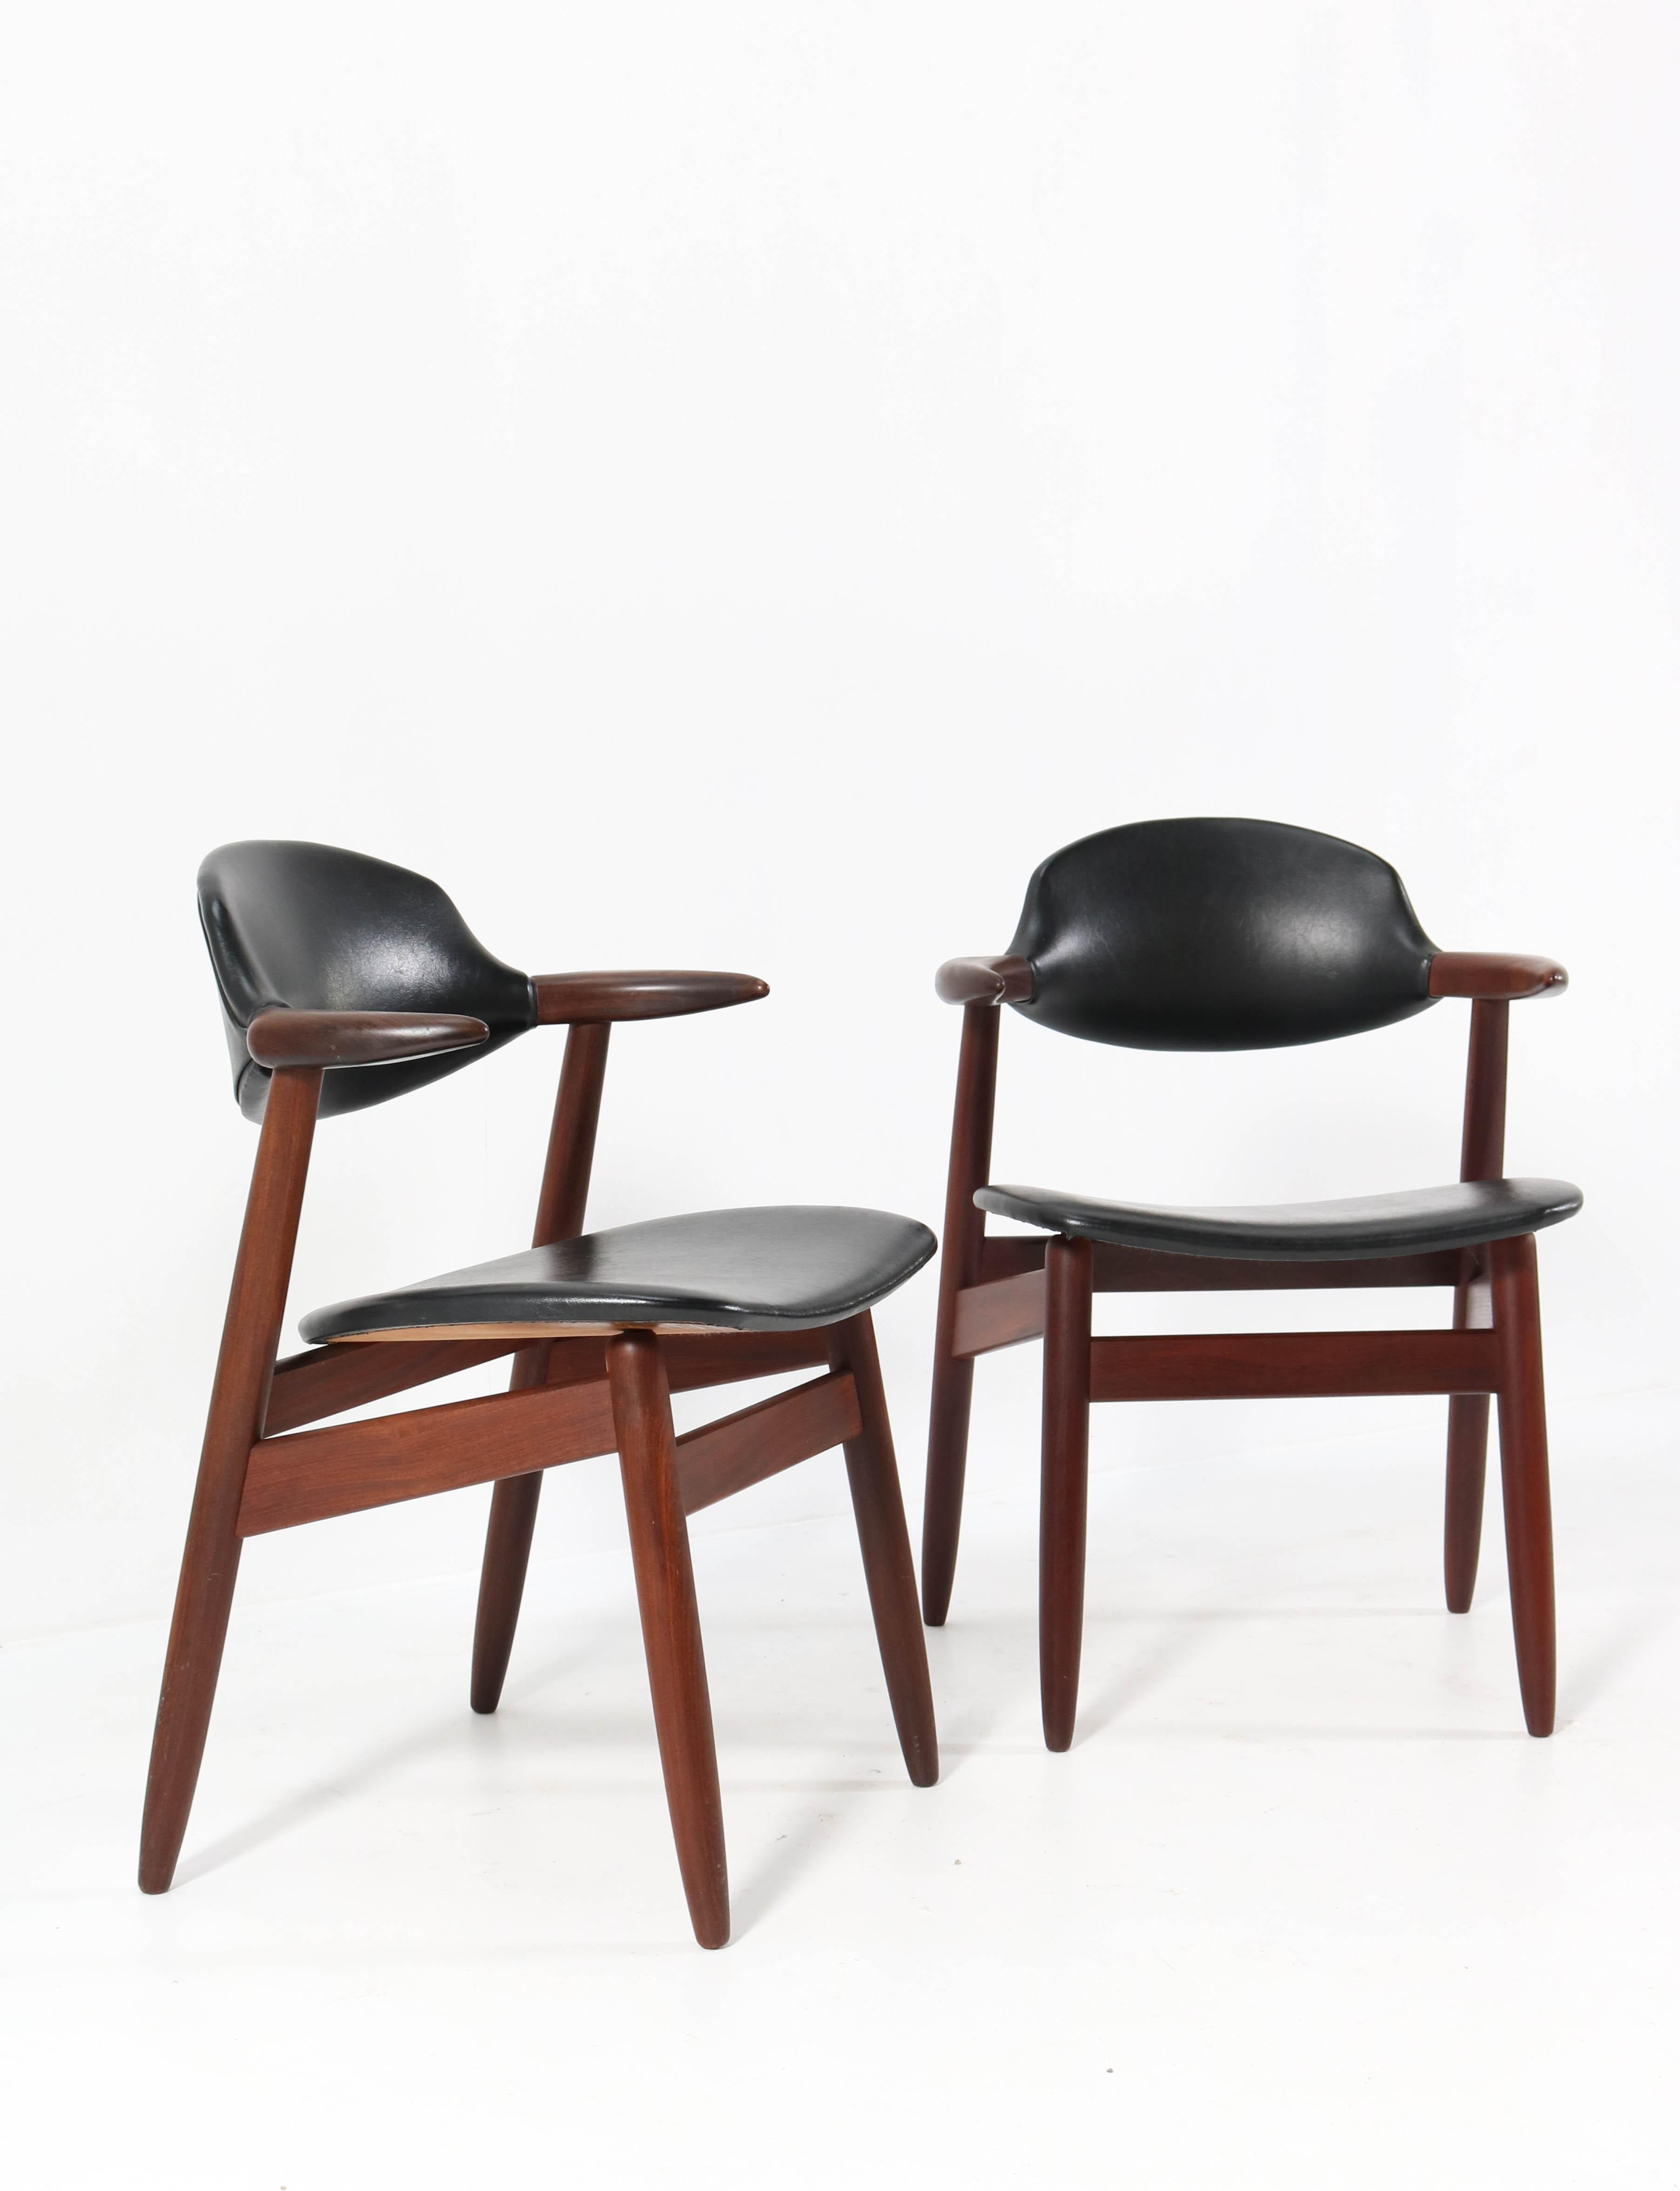 Wonderful pair of Mid-Century Modern cowhorn chairs from the Propos series.
Design by Tijsseling for Hulmefa.
Striking Dutch design from the 1960s.
Solid teak frame with original faux leather upholstery.
In very good condition with a beautiful